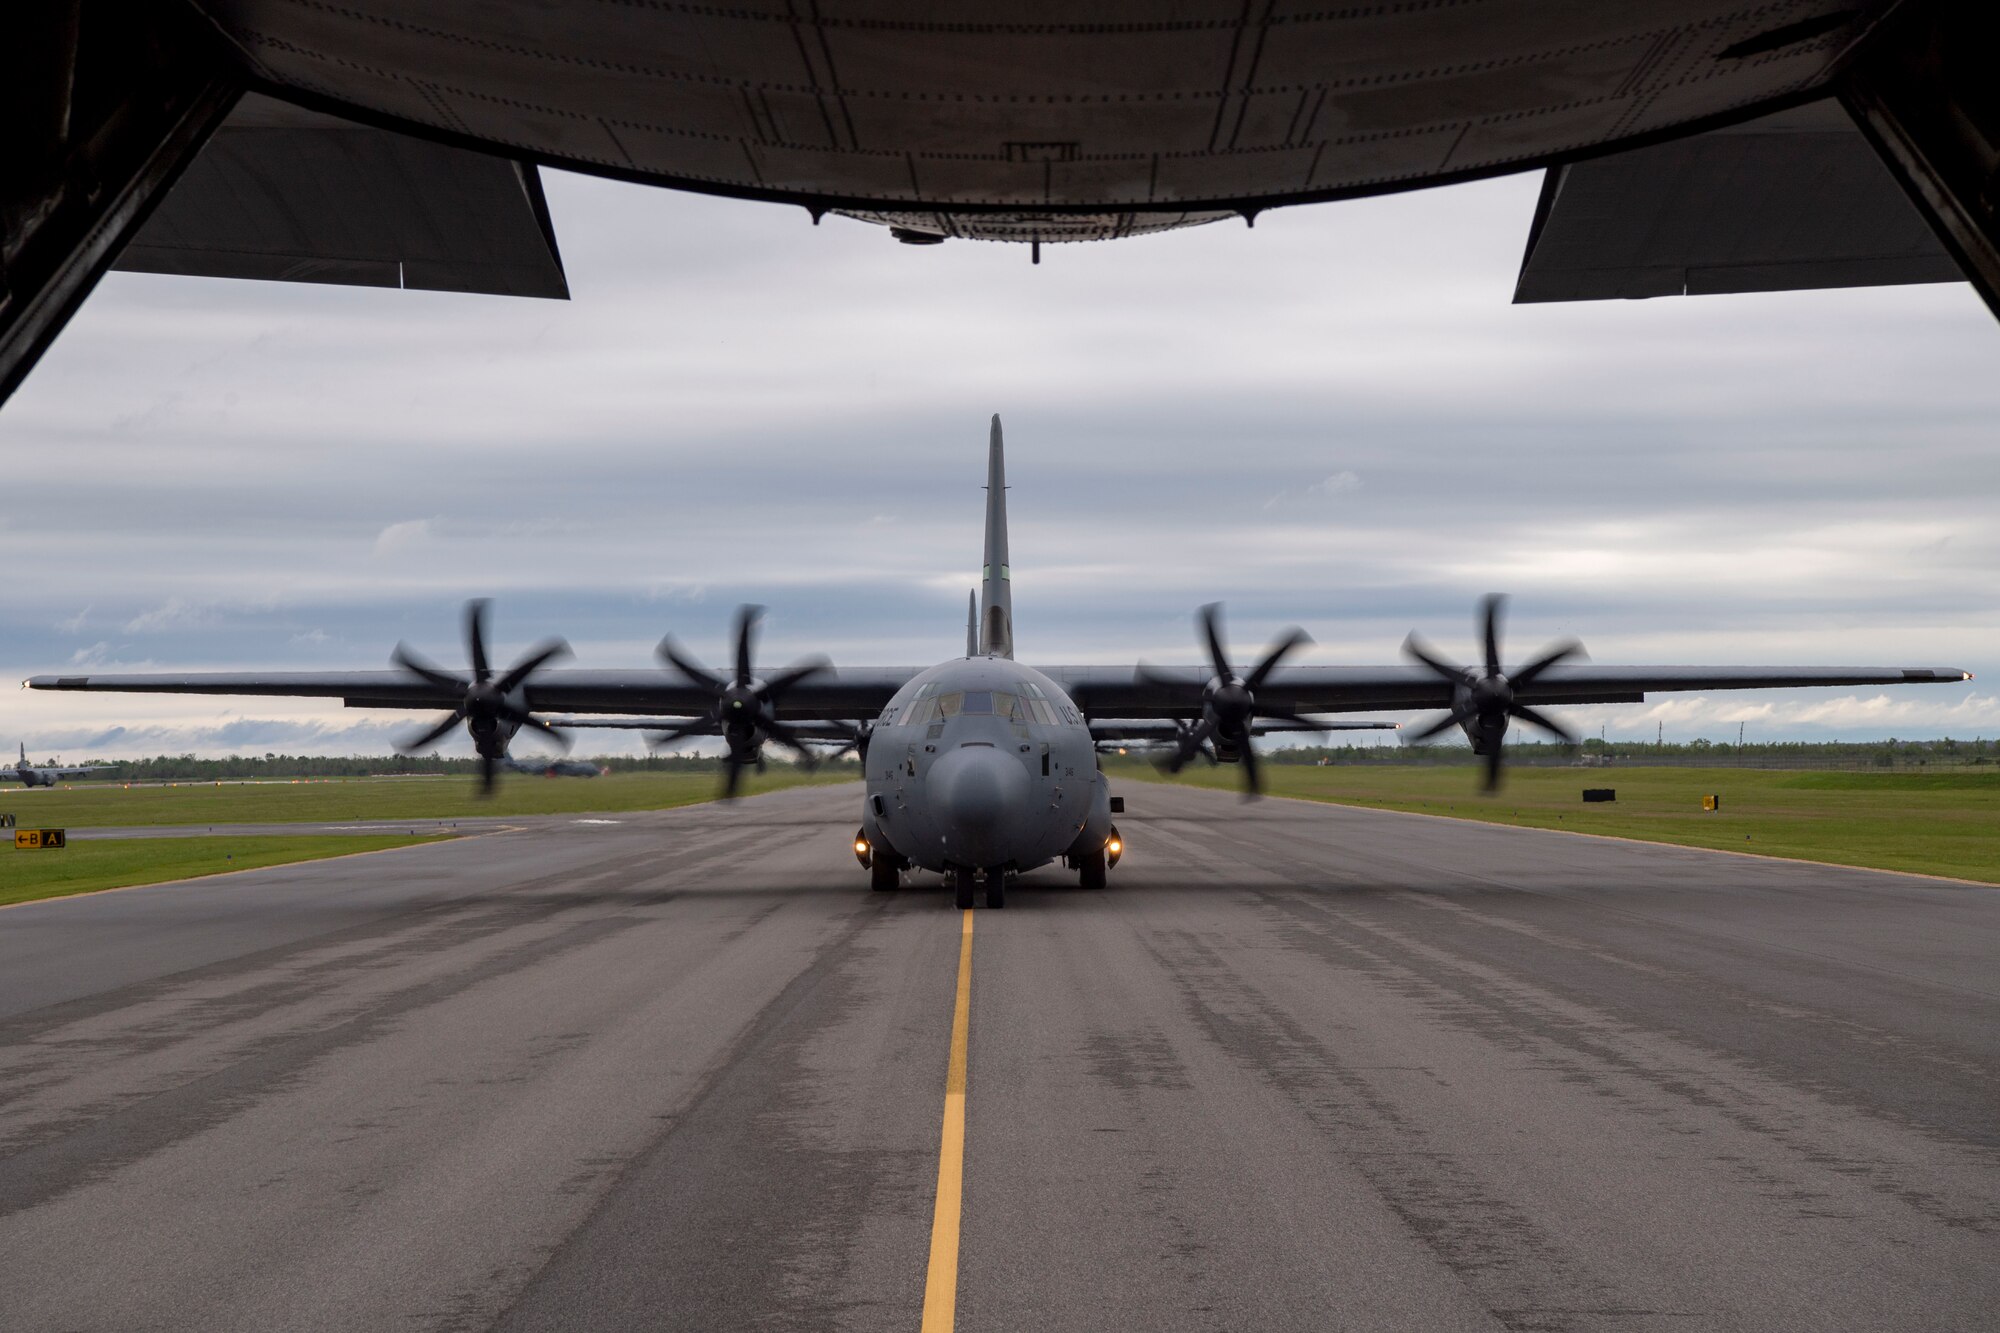 A group of C-130Js taxi on the flightline